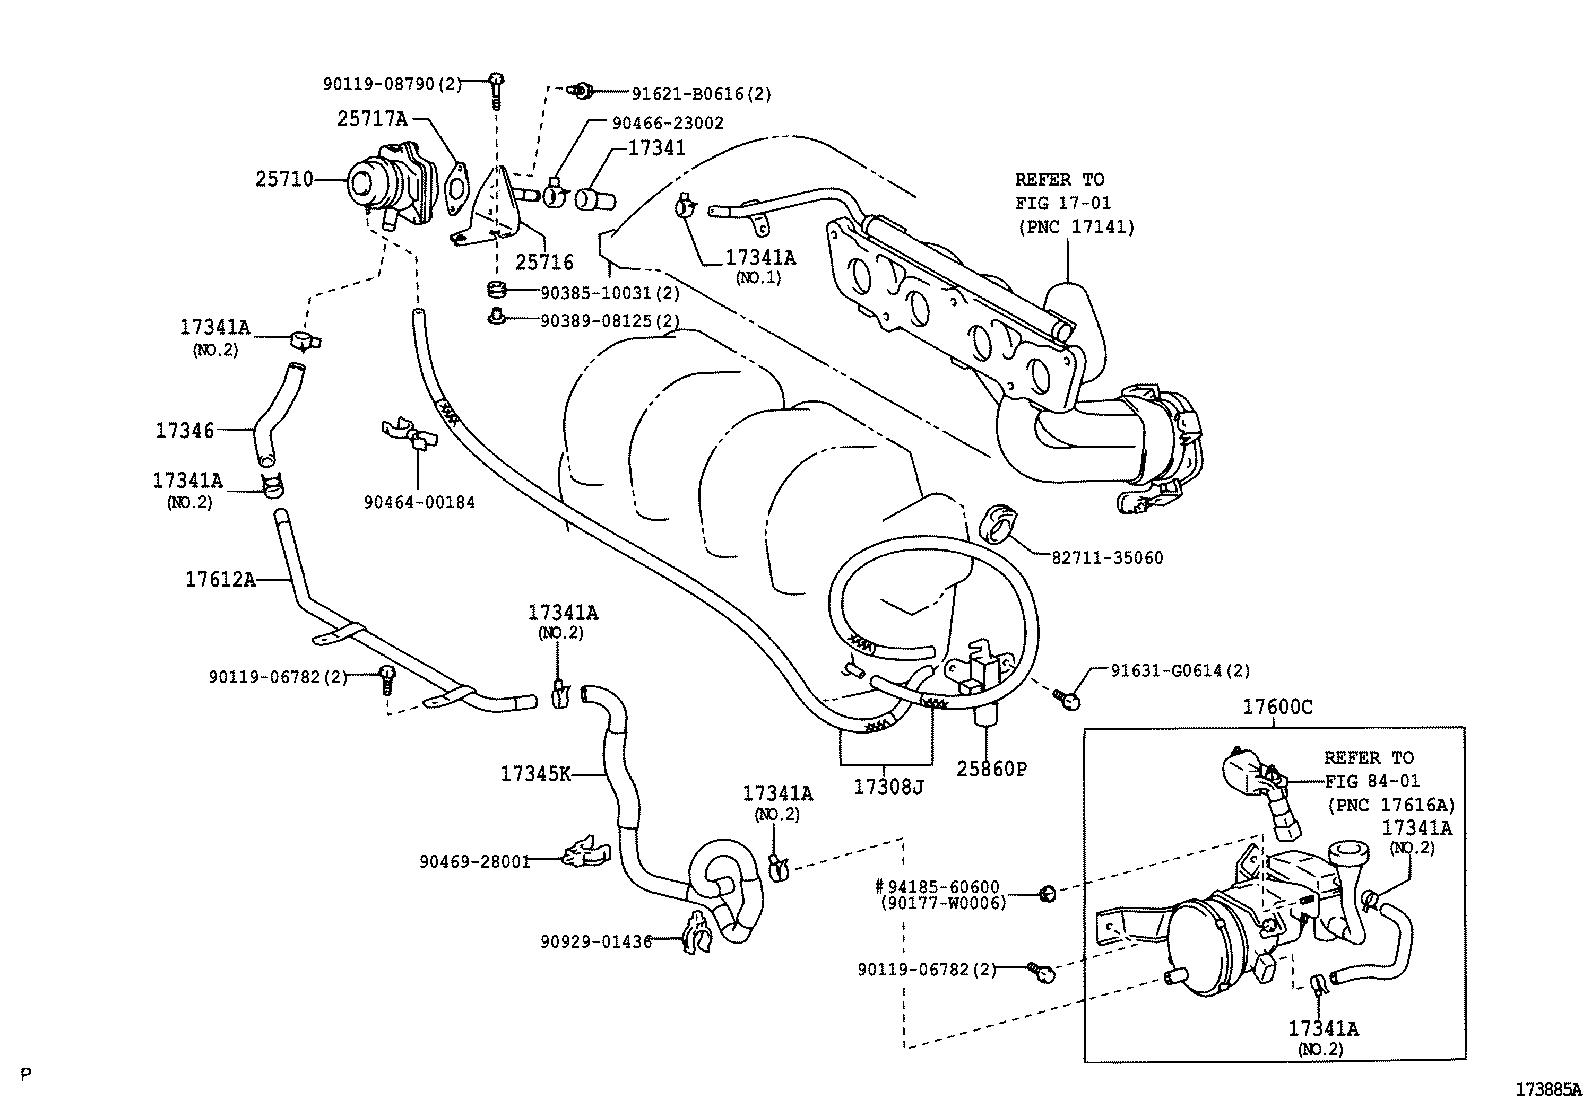  COROLLA HB UKP |  MANIFOLD AIR INJECTION SYSTEM